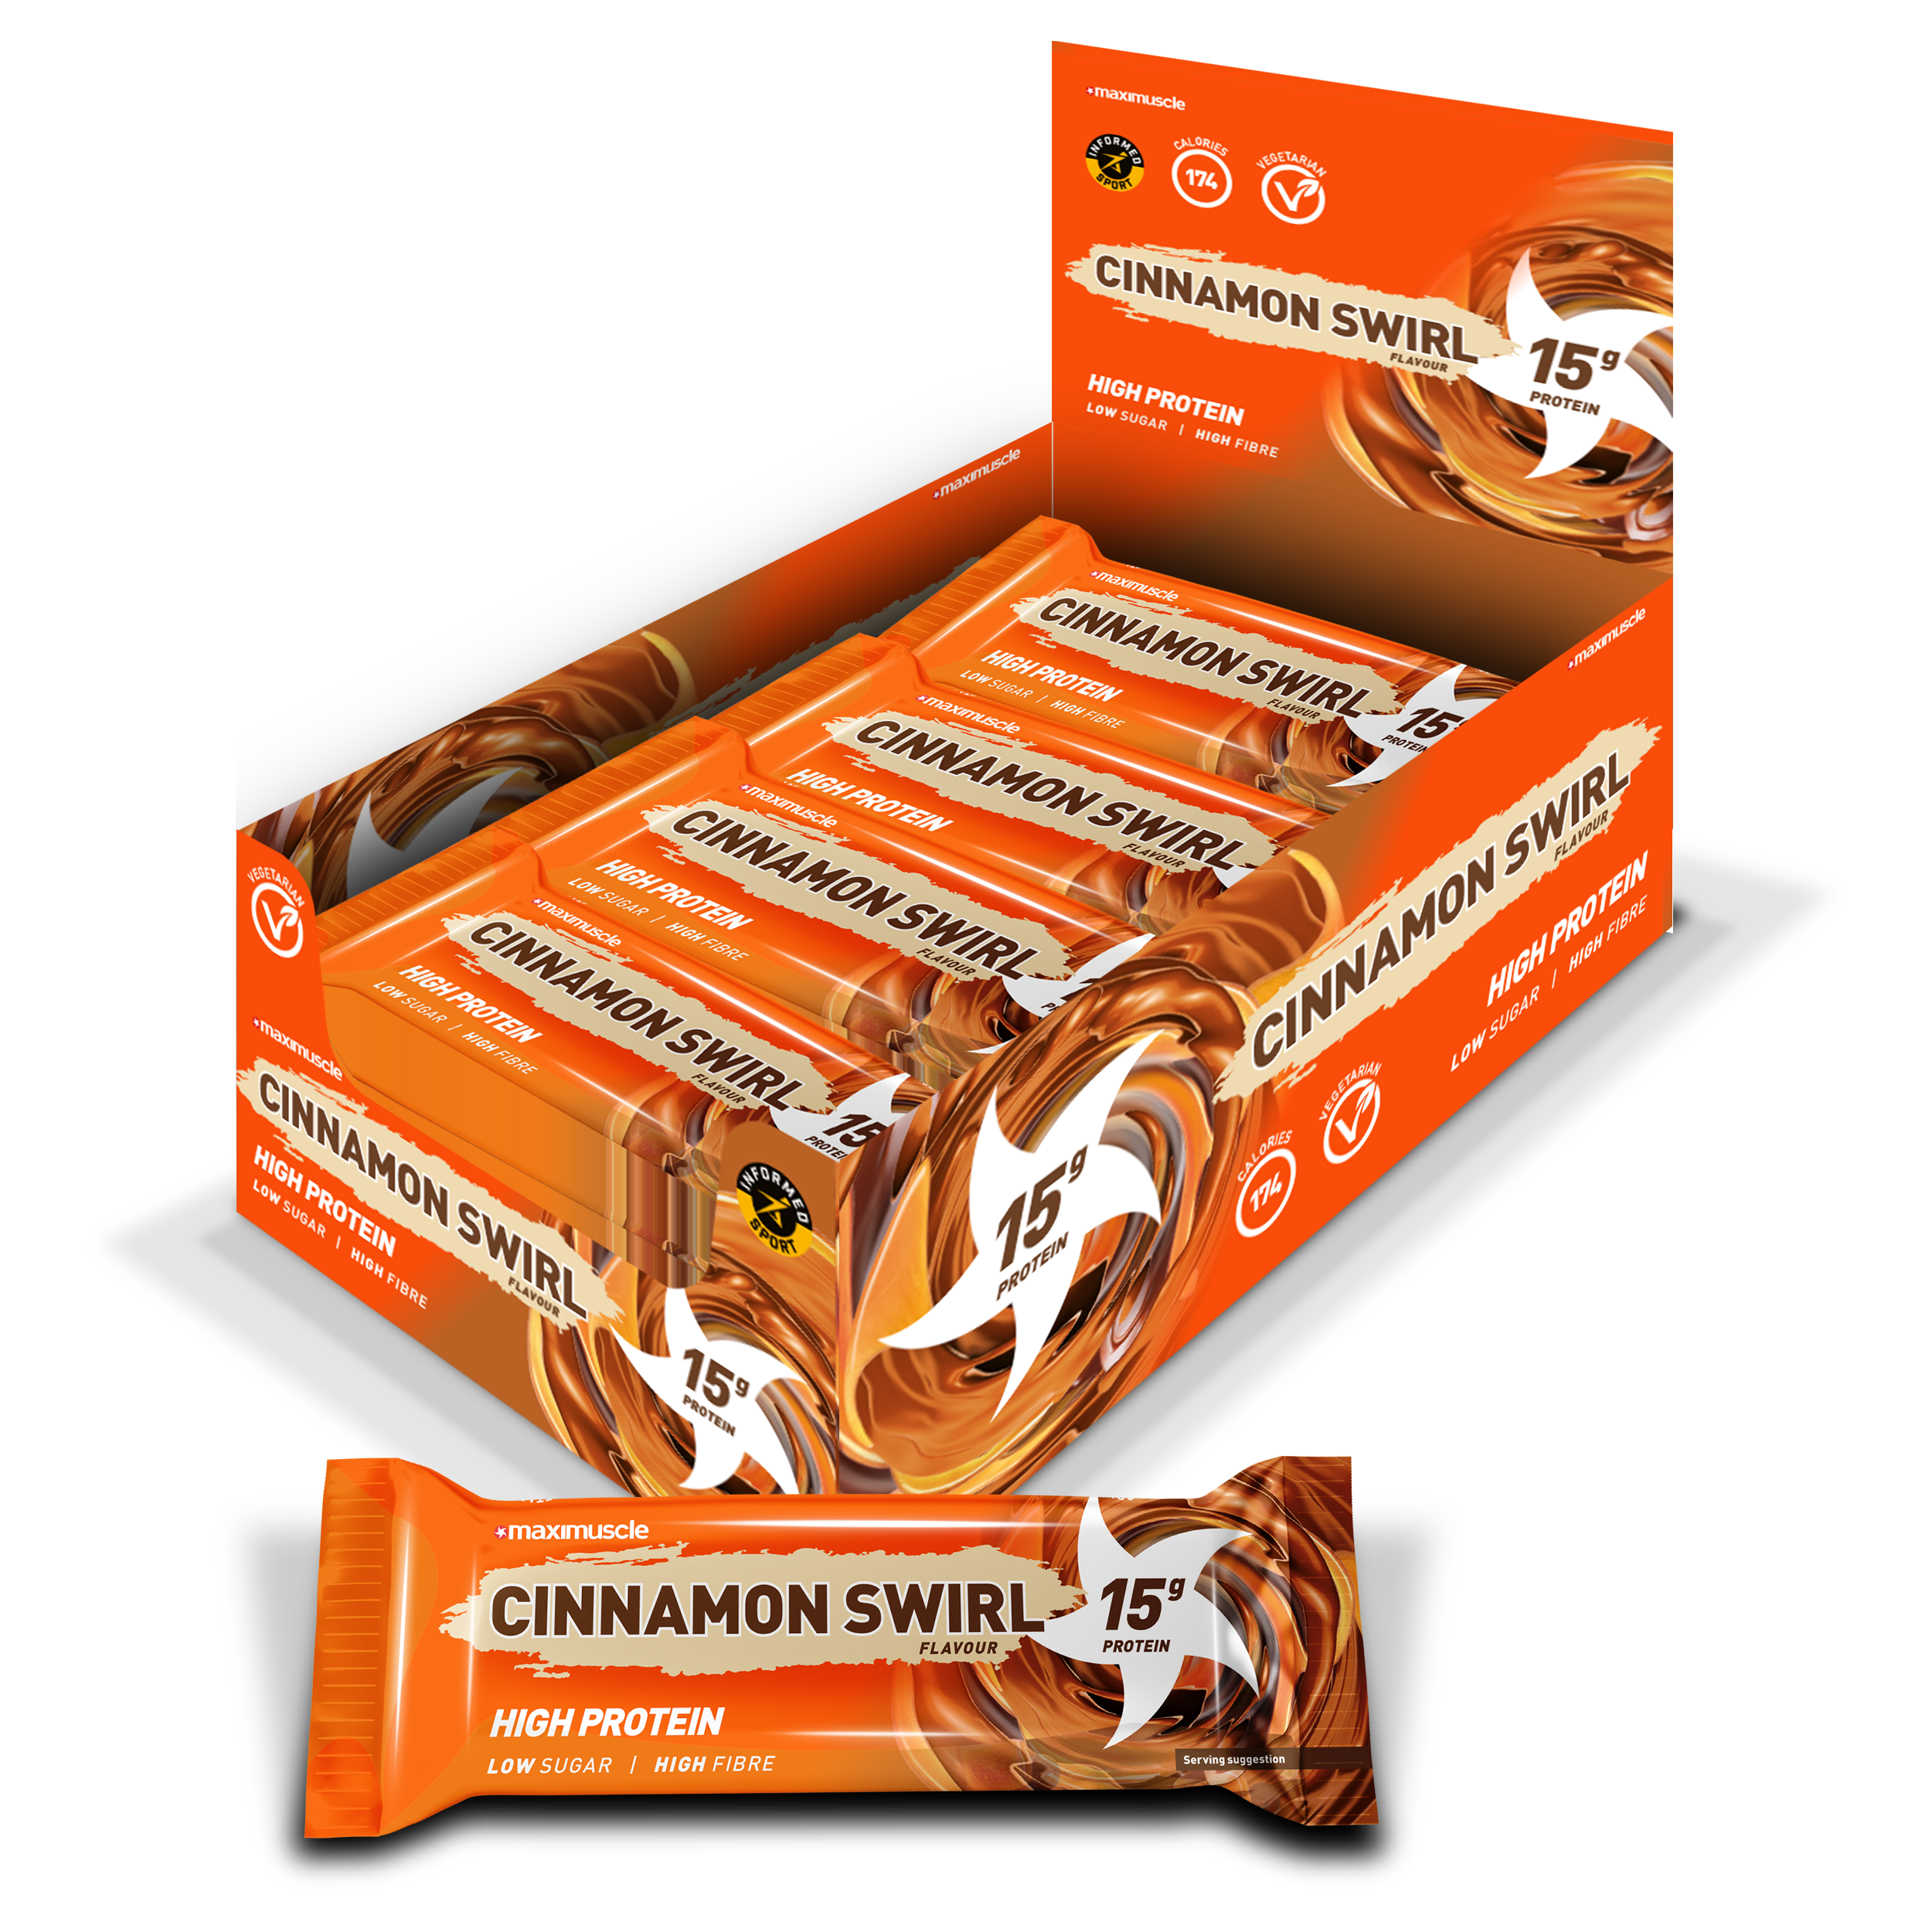 Epicurium adds 5 new Maximuscle protein bars